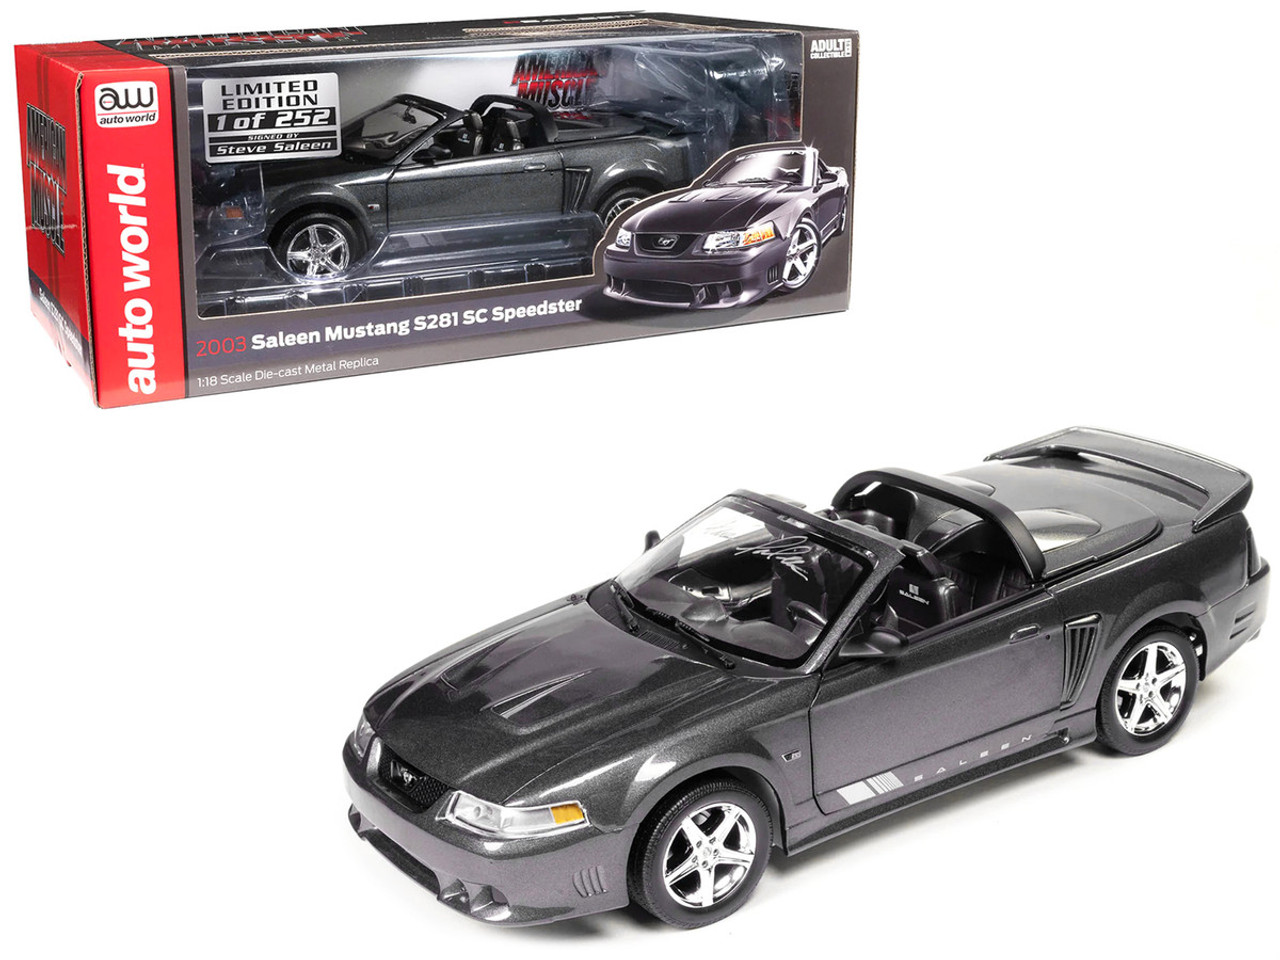 2003 Ford Mustang Saleen S281 SC Speedster Dark Shadow Gray Metallic (Signed by Steve Saleen) Limited Edition to 252 pieces Worldwide "American Muscle" Series 1/18 Diecast Model Car by Auto World